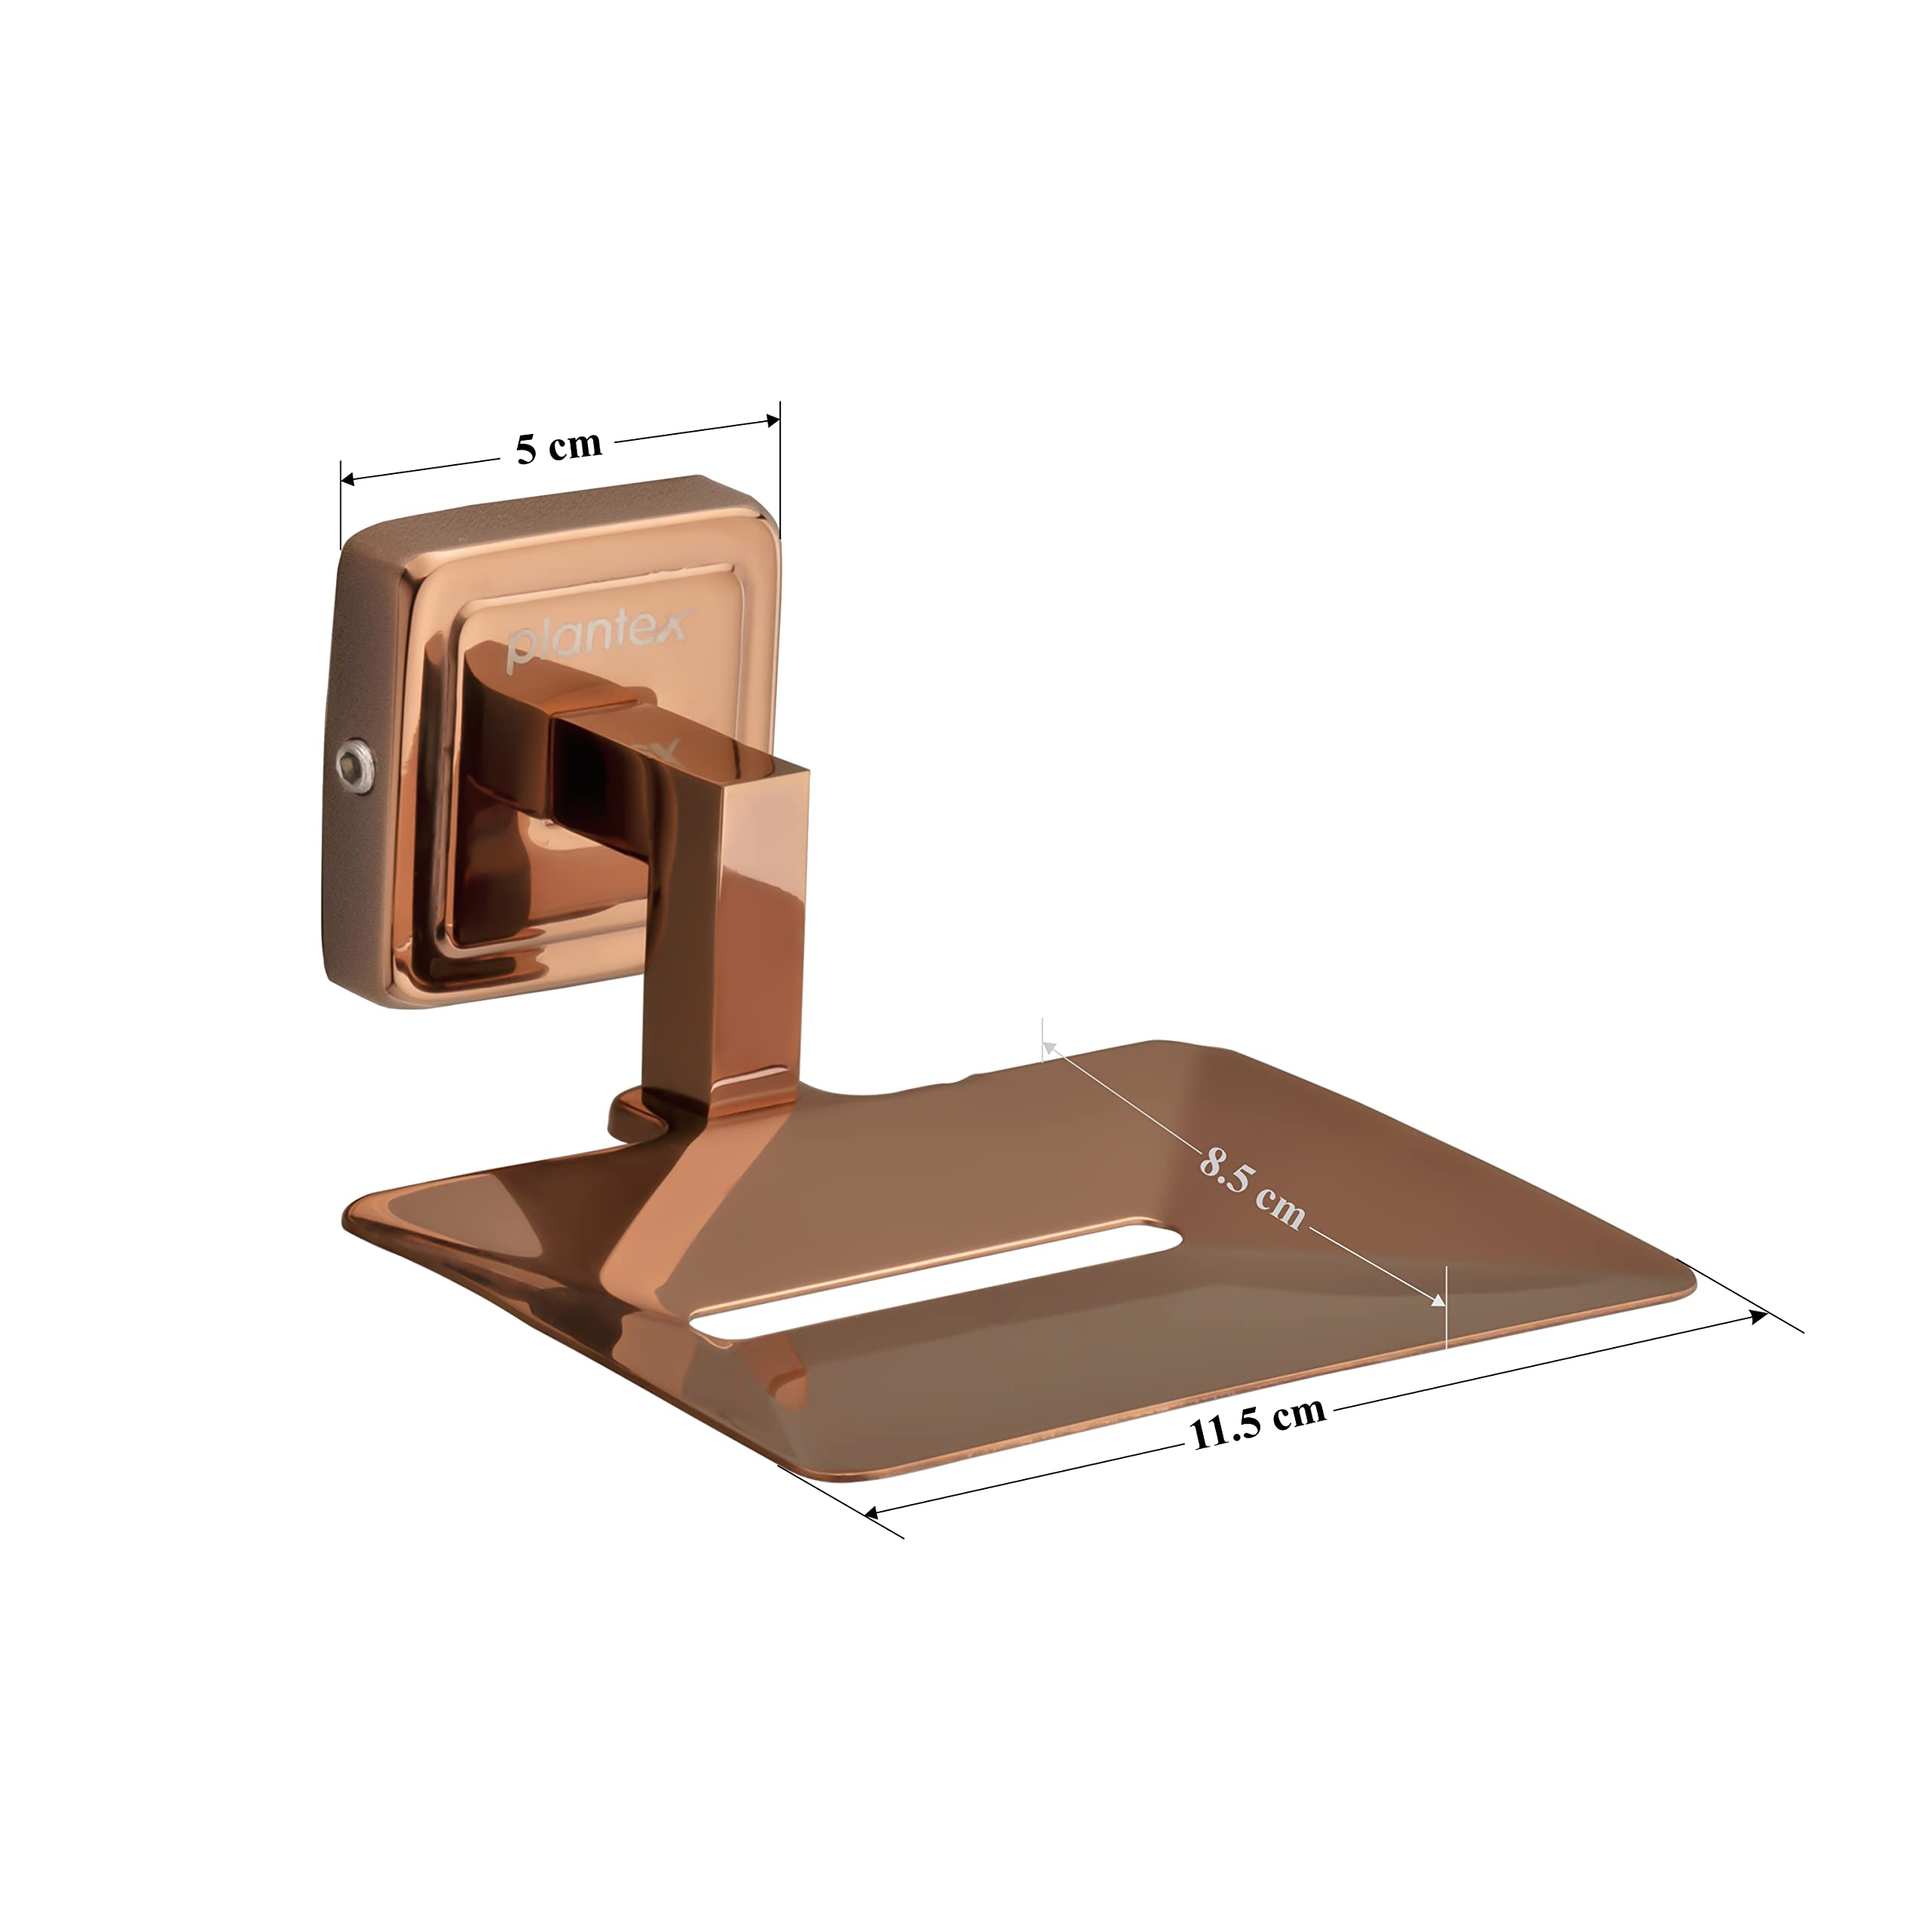 Plantex Stainless Steel 304 Grade Decan Soap Holder for Bathroom/Soap Dish/Bathroom Soap Stand/Bathroom Accessories - Pack of 3 (647 - PVD Rose Gold)